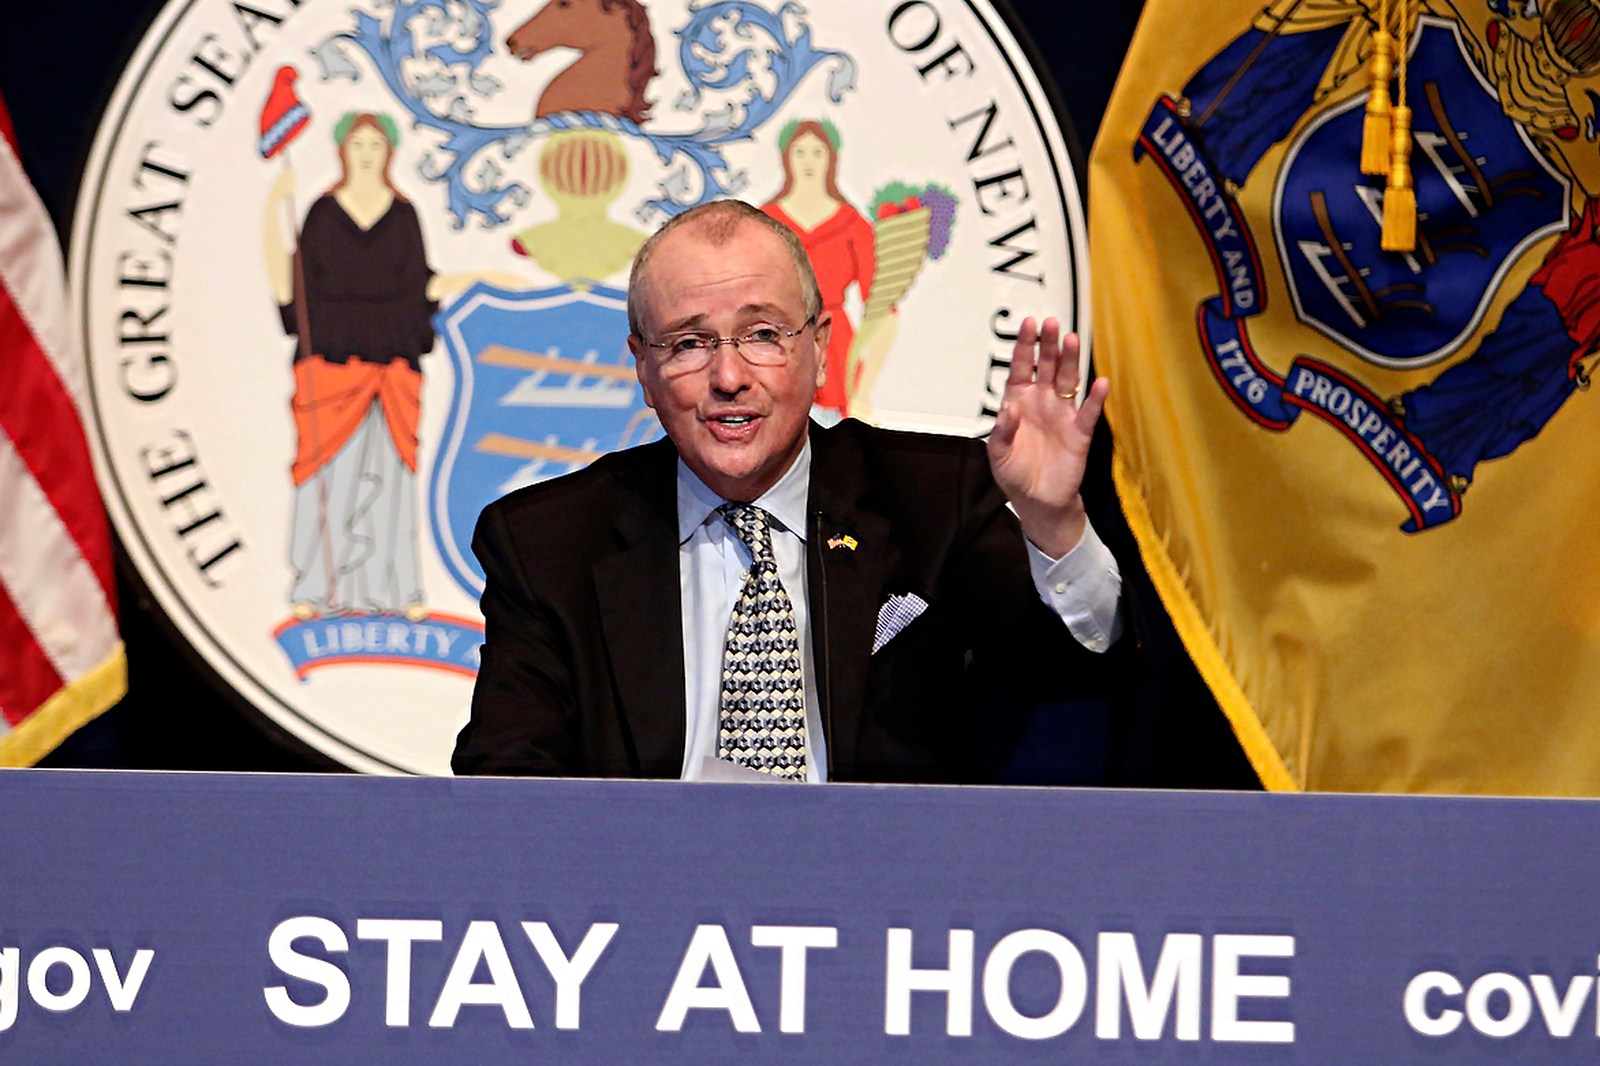 New Jersey Gov. Phil Murphy updates the state on the coronavirus pandemic during a press conference at the War Memorial in Trenton, New Jersey on April 24.